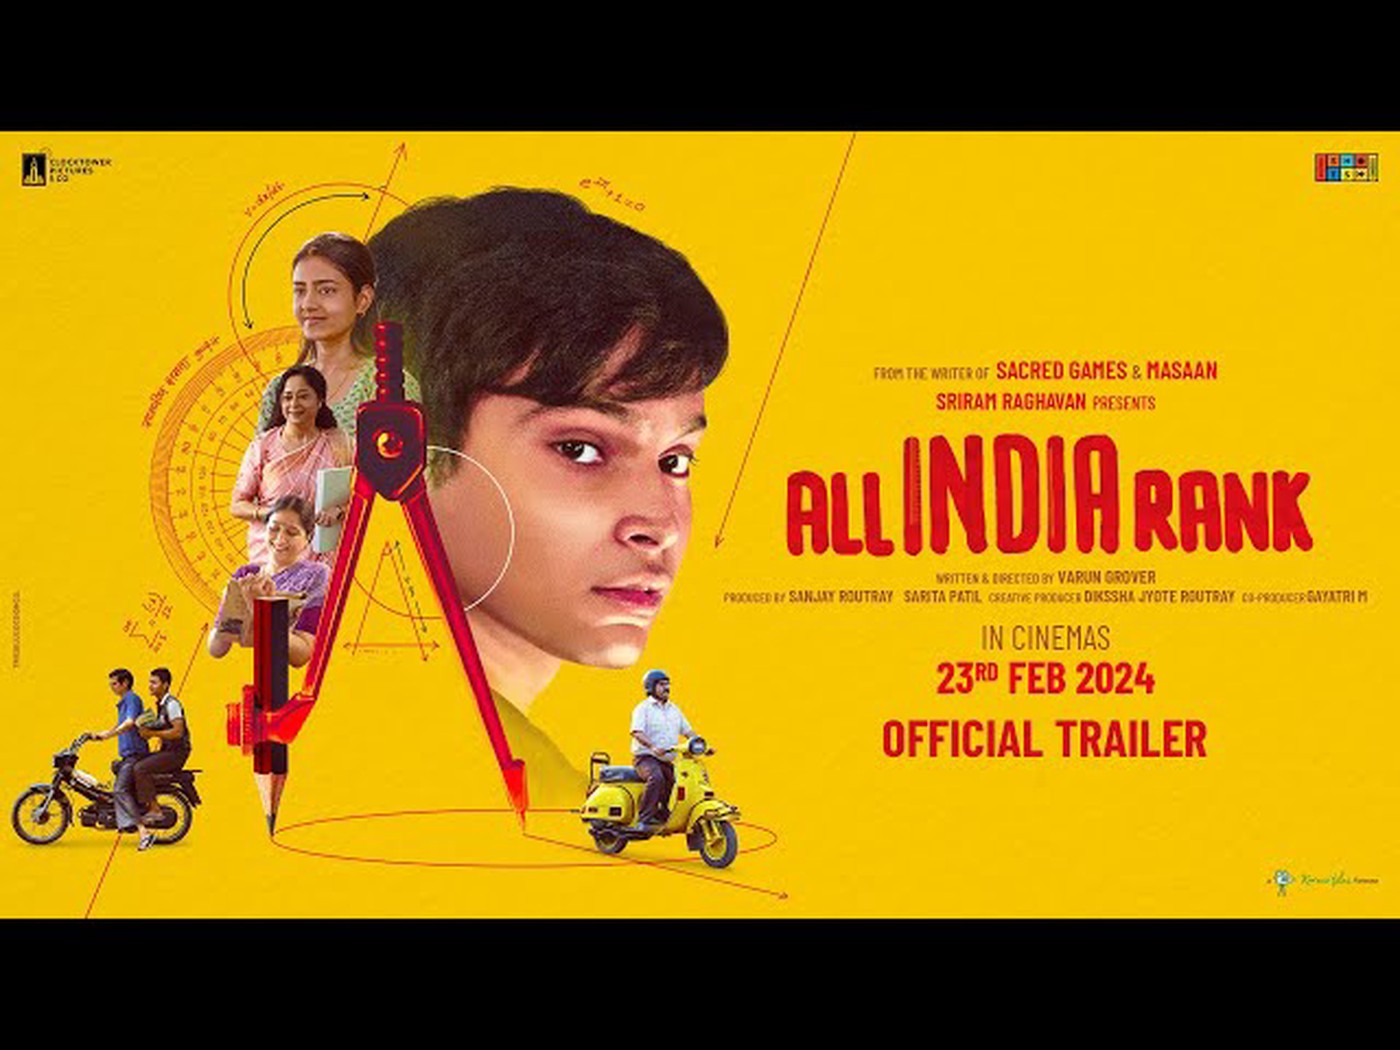 Binge Recommends: All India Rank is a viewer's delight